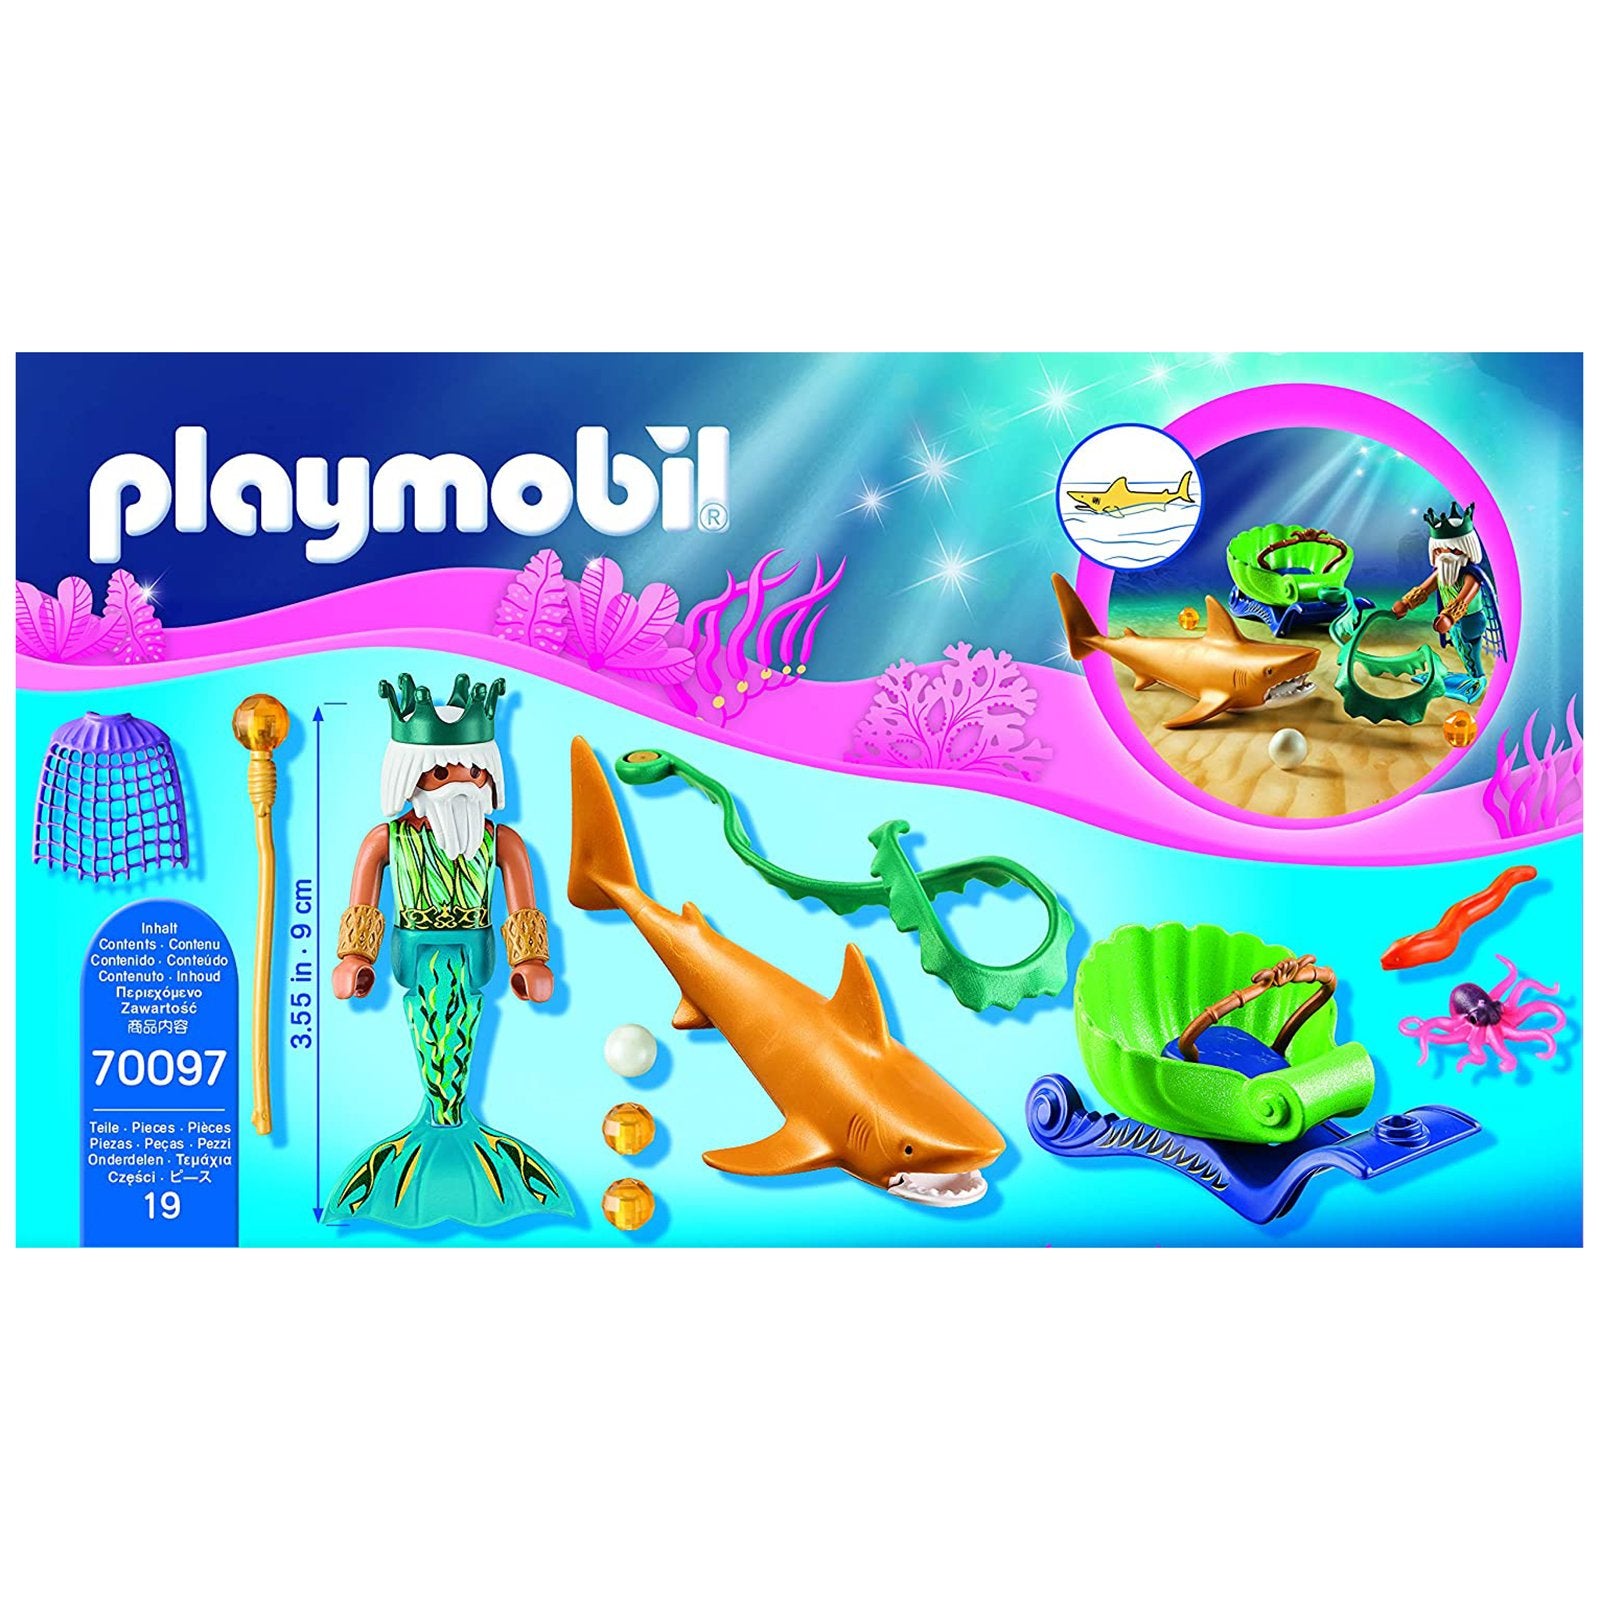 Playmobil Magic King Of The Sea With Shark Carriage Building Set 70097